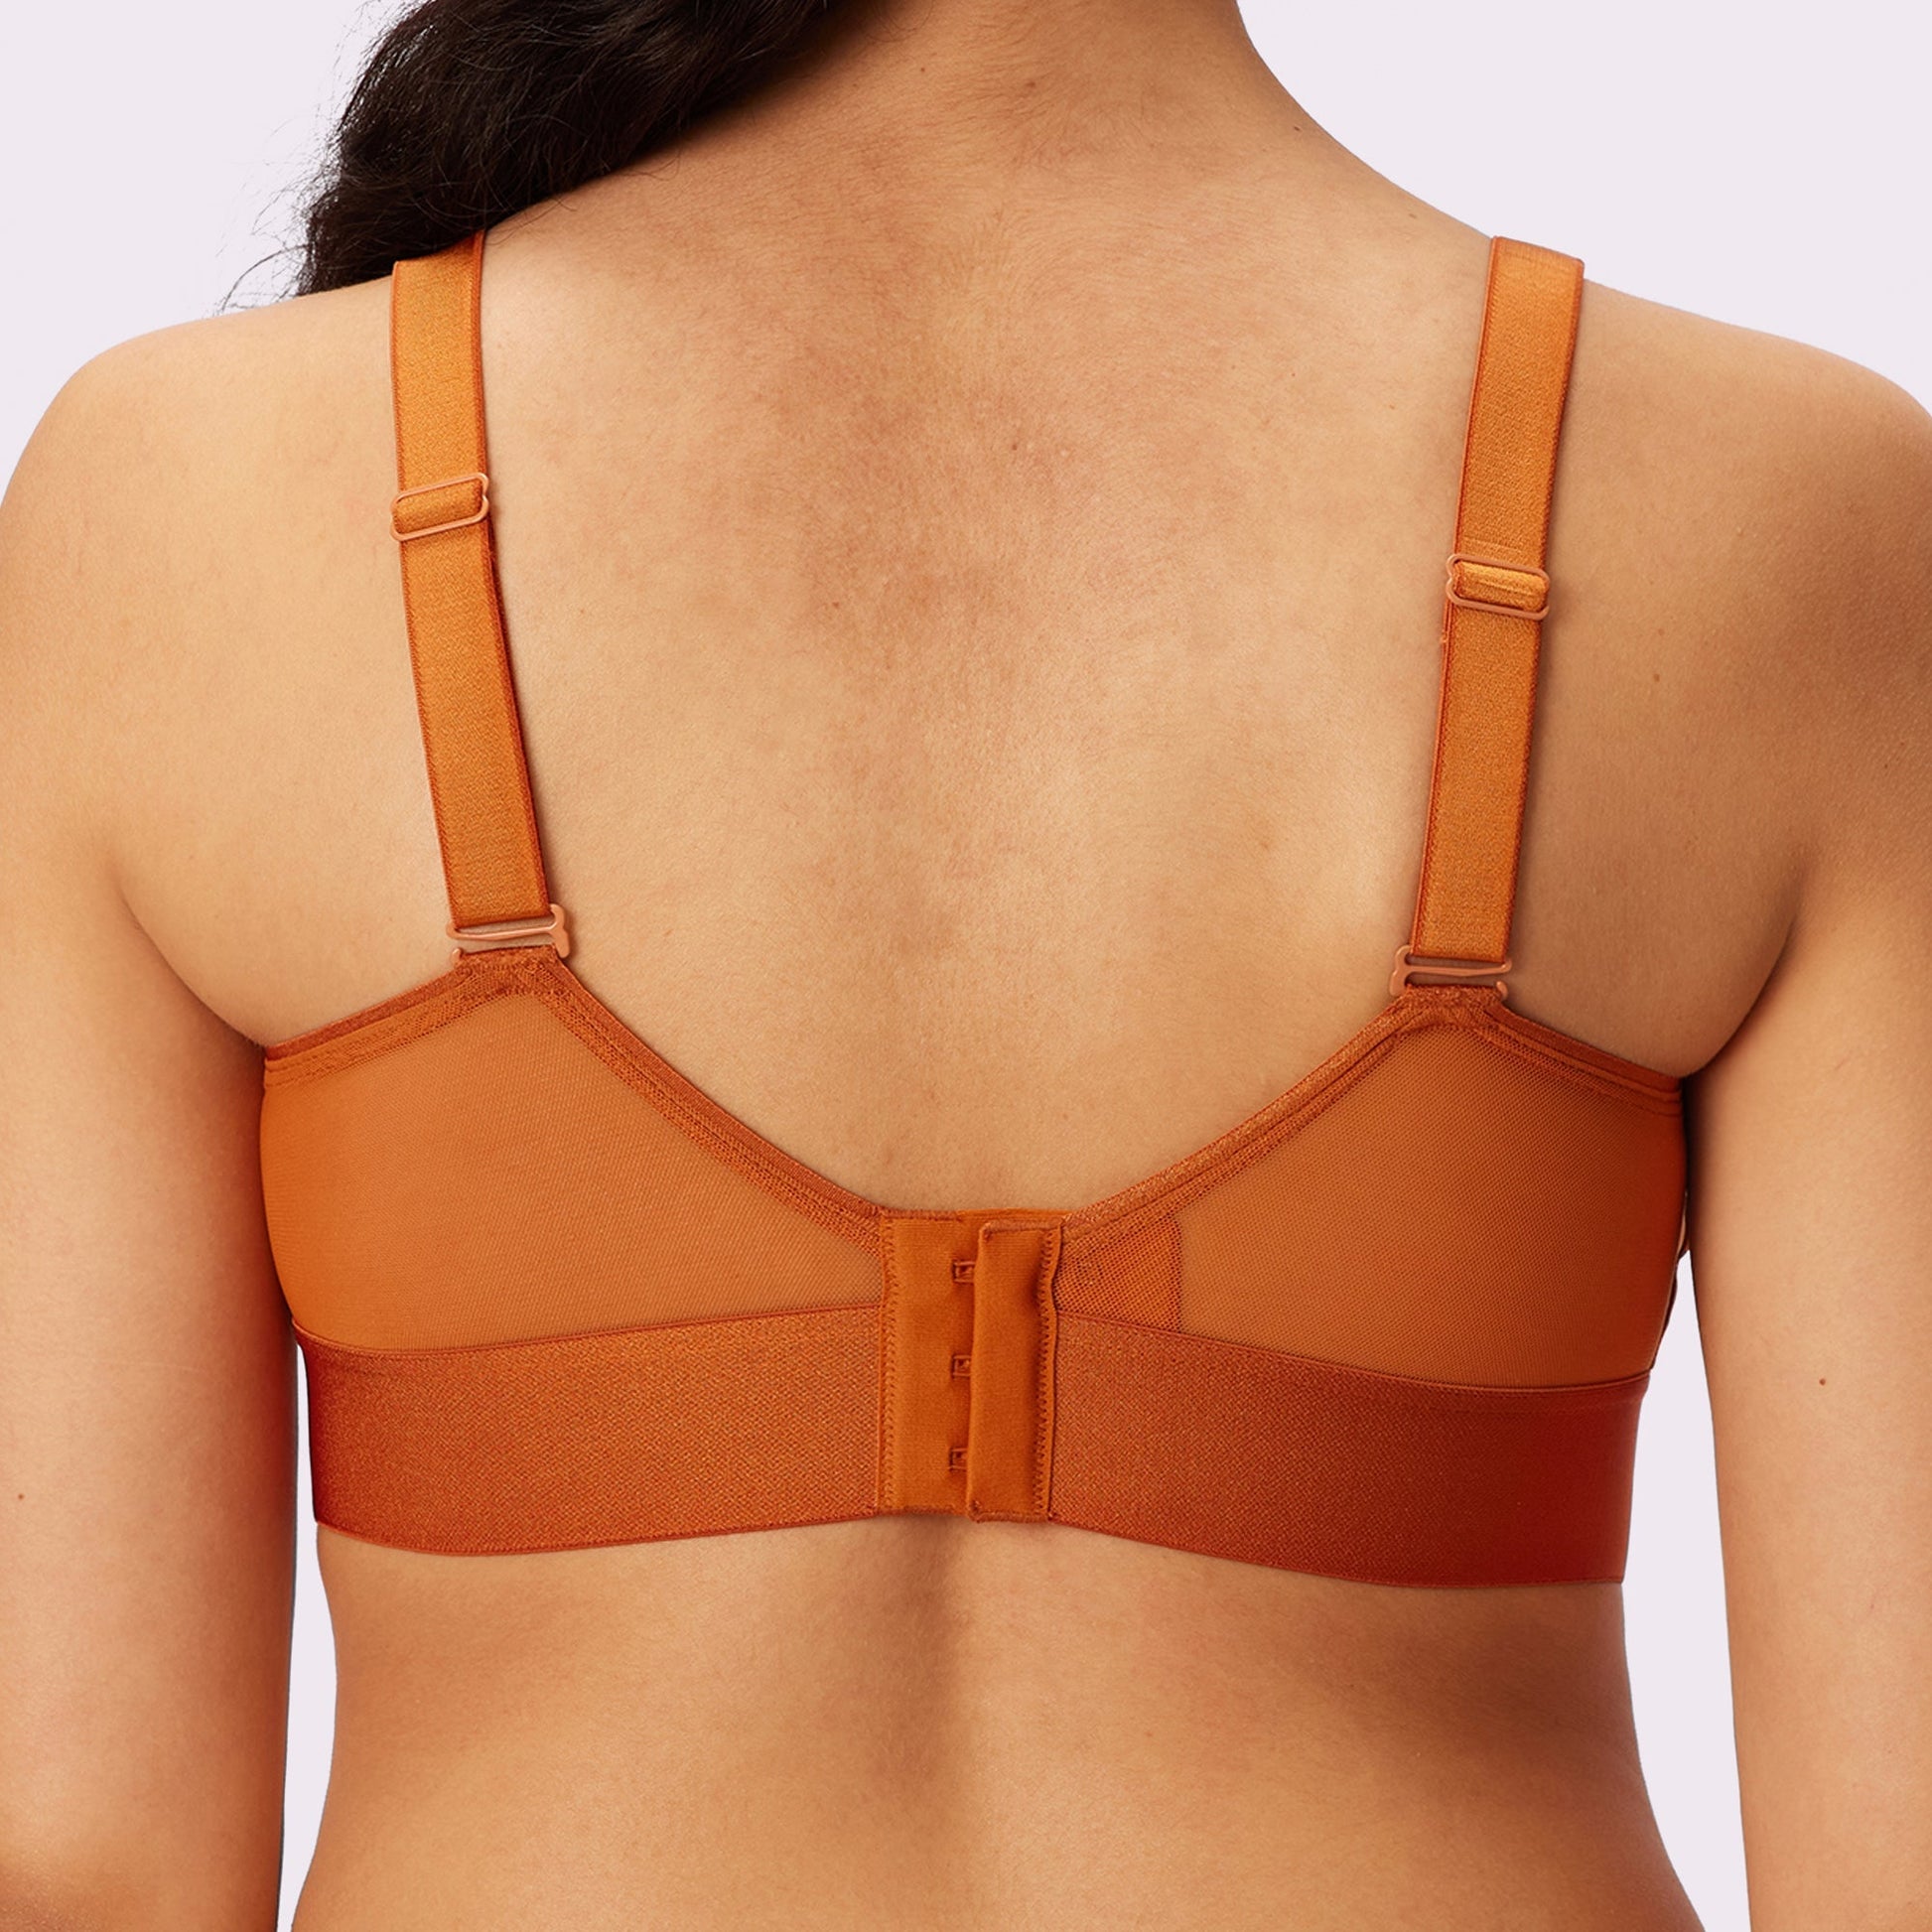 our new luxe mesh scoop bralette is perfect for our folks who “hate we